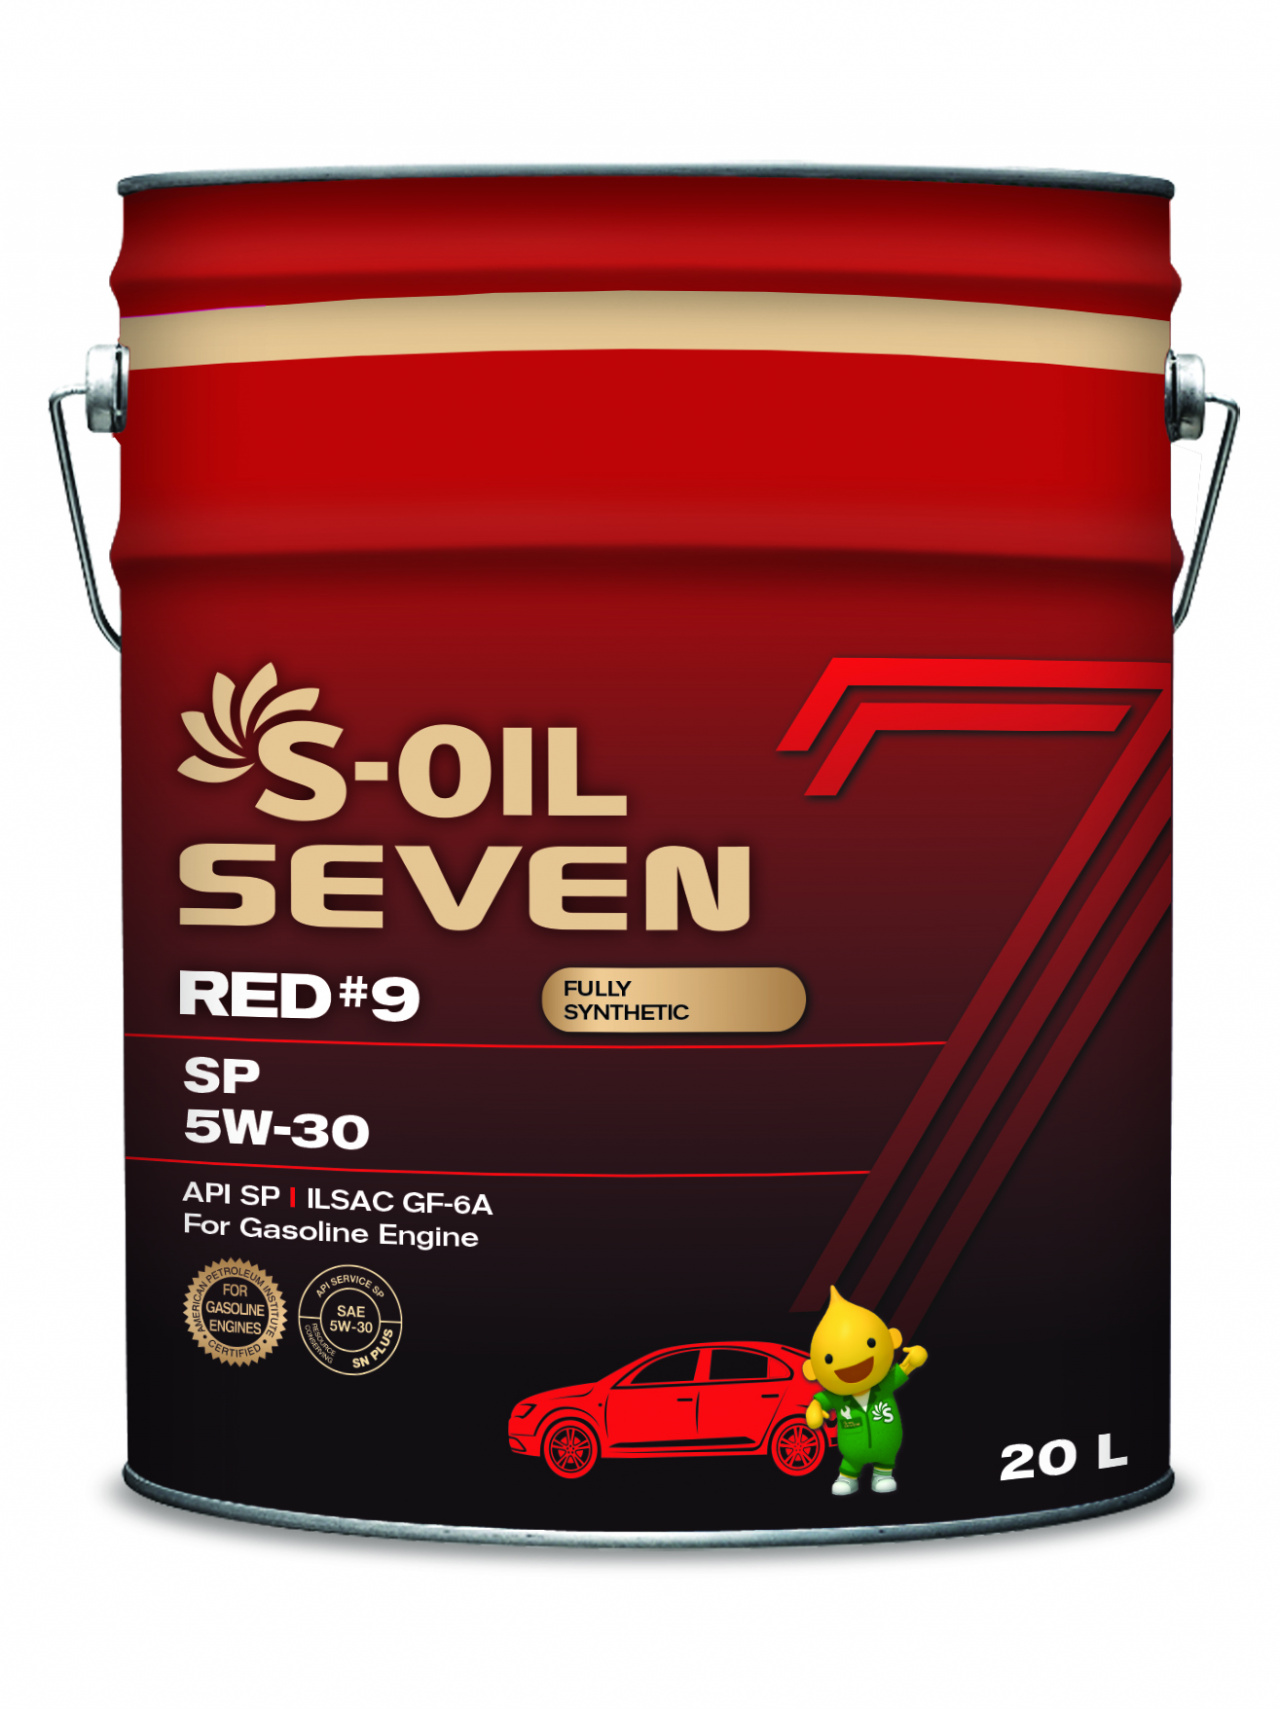 Масло Моторное S-OIL 7 RED #9 SN 5W30 (20л), синтетика